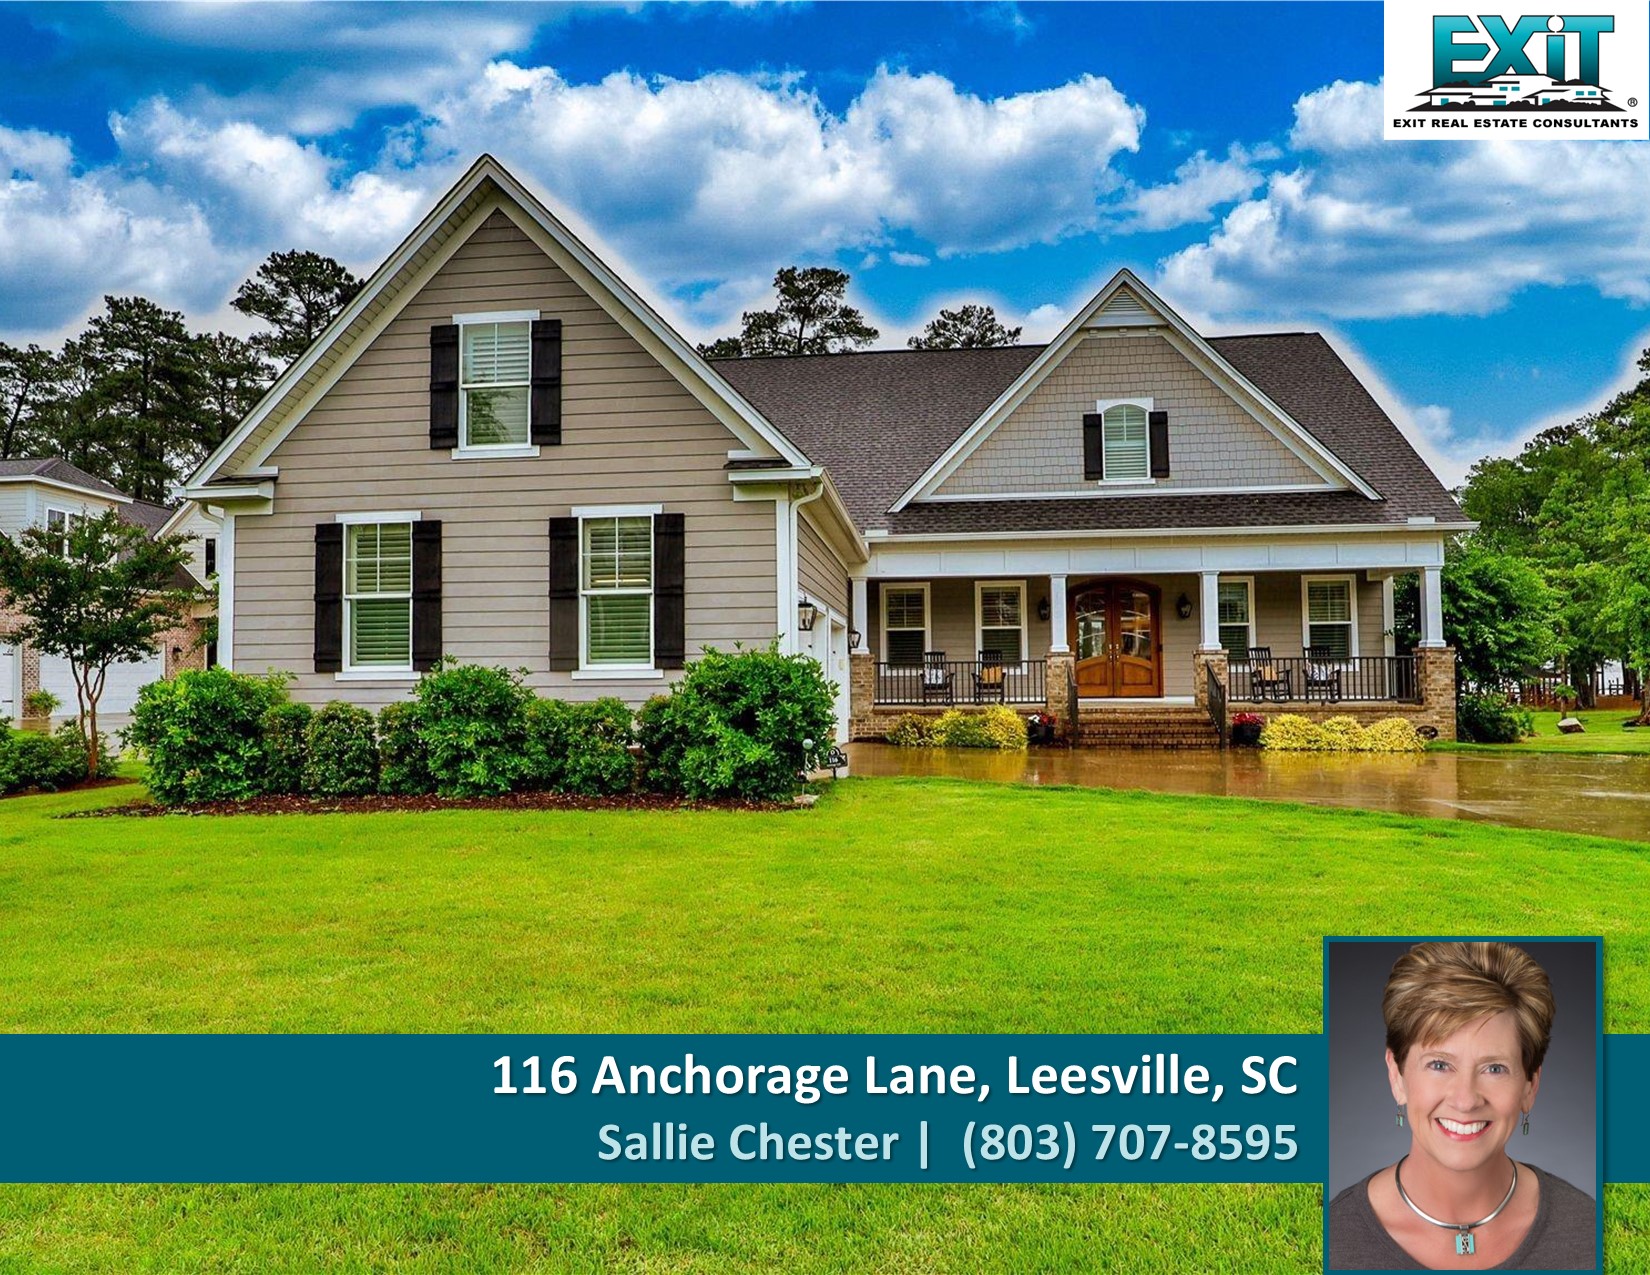 Just listed in Harbour Watch - Leesville